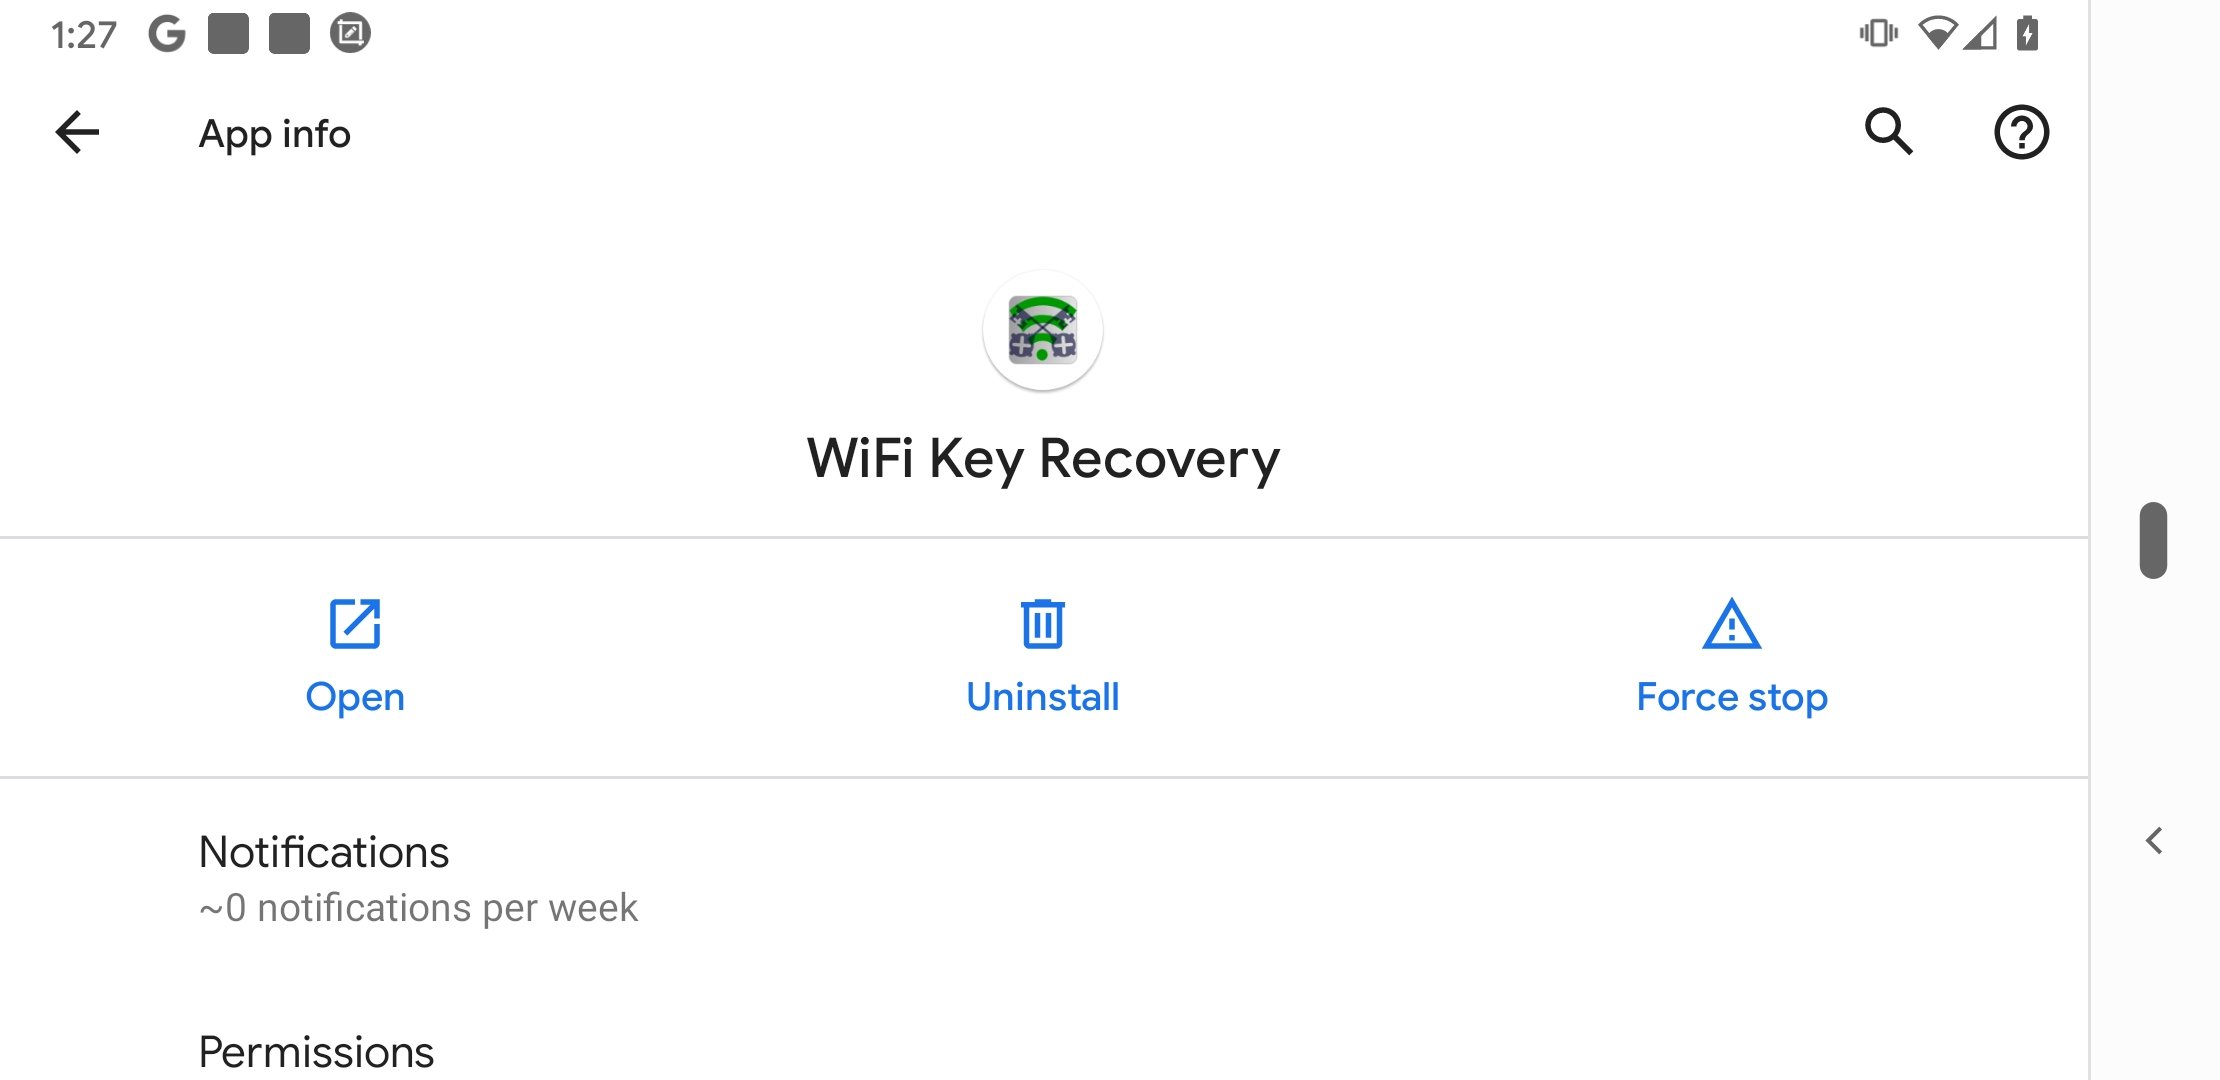 wifi password recovery apk free download